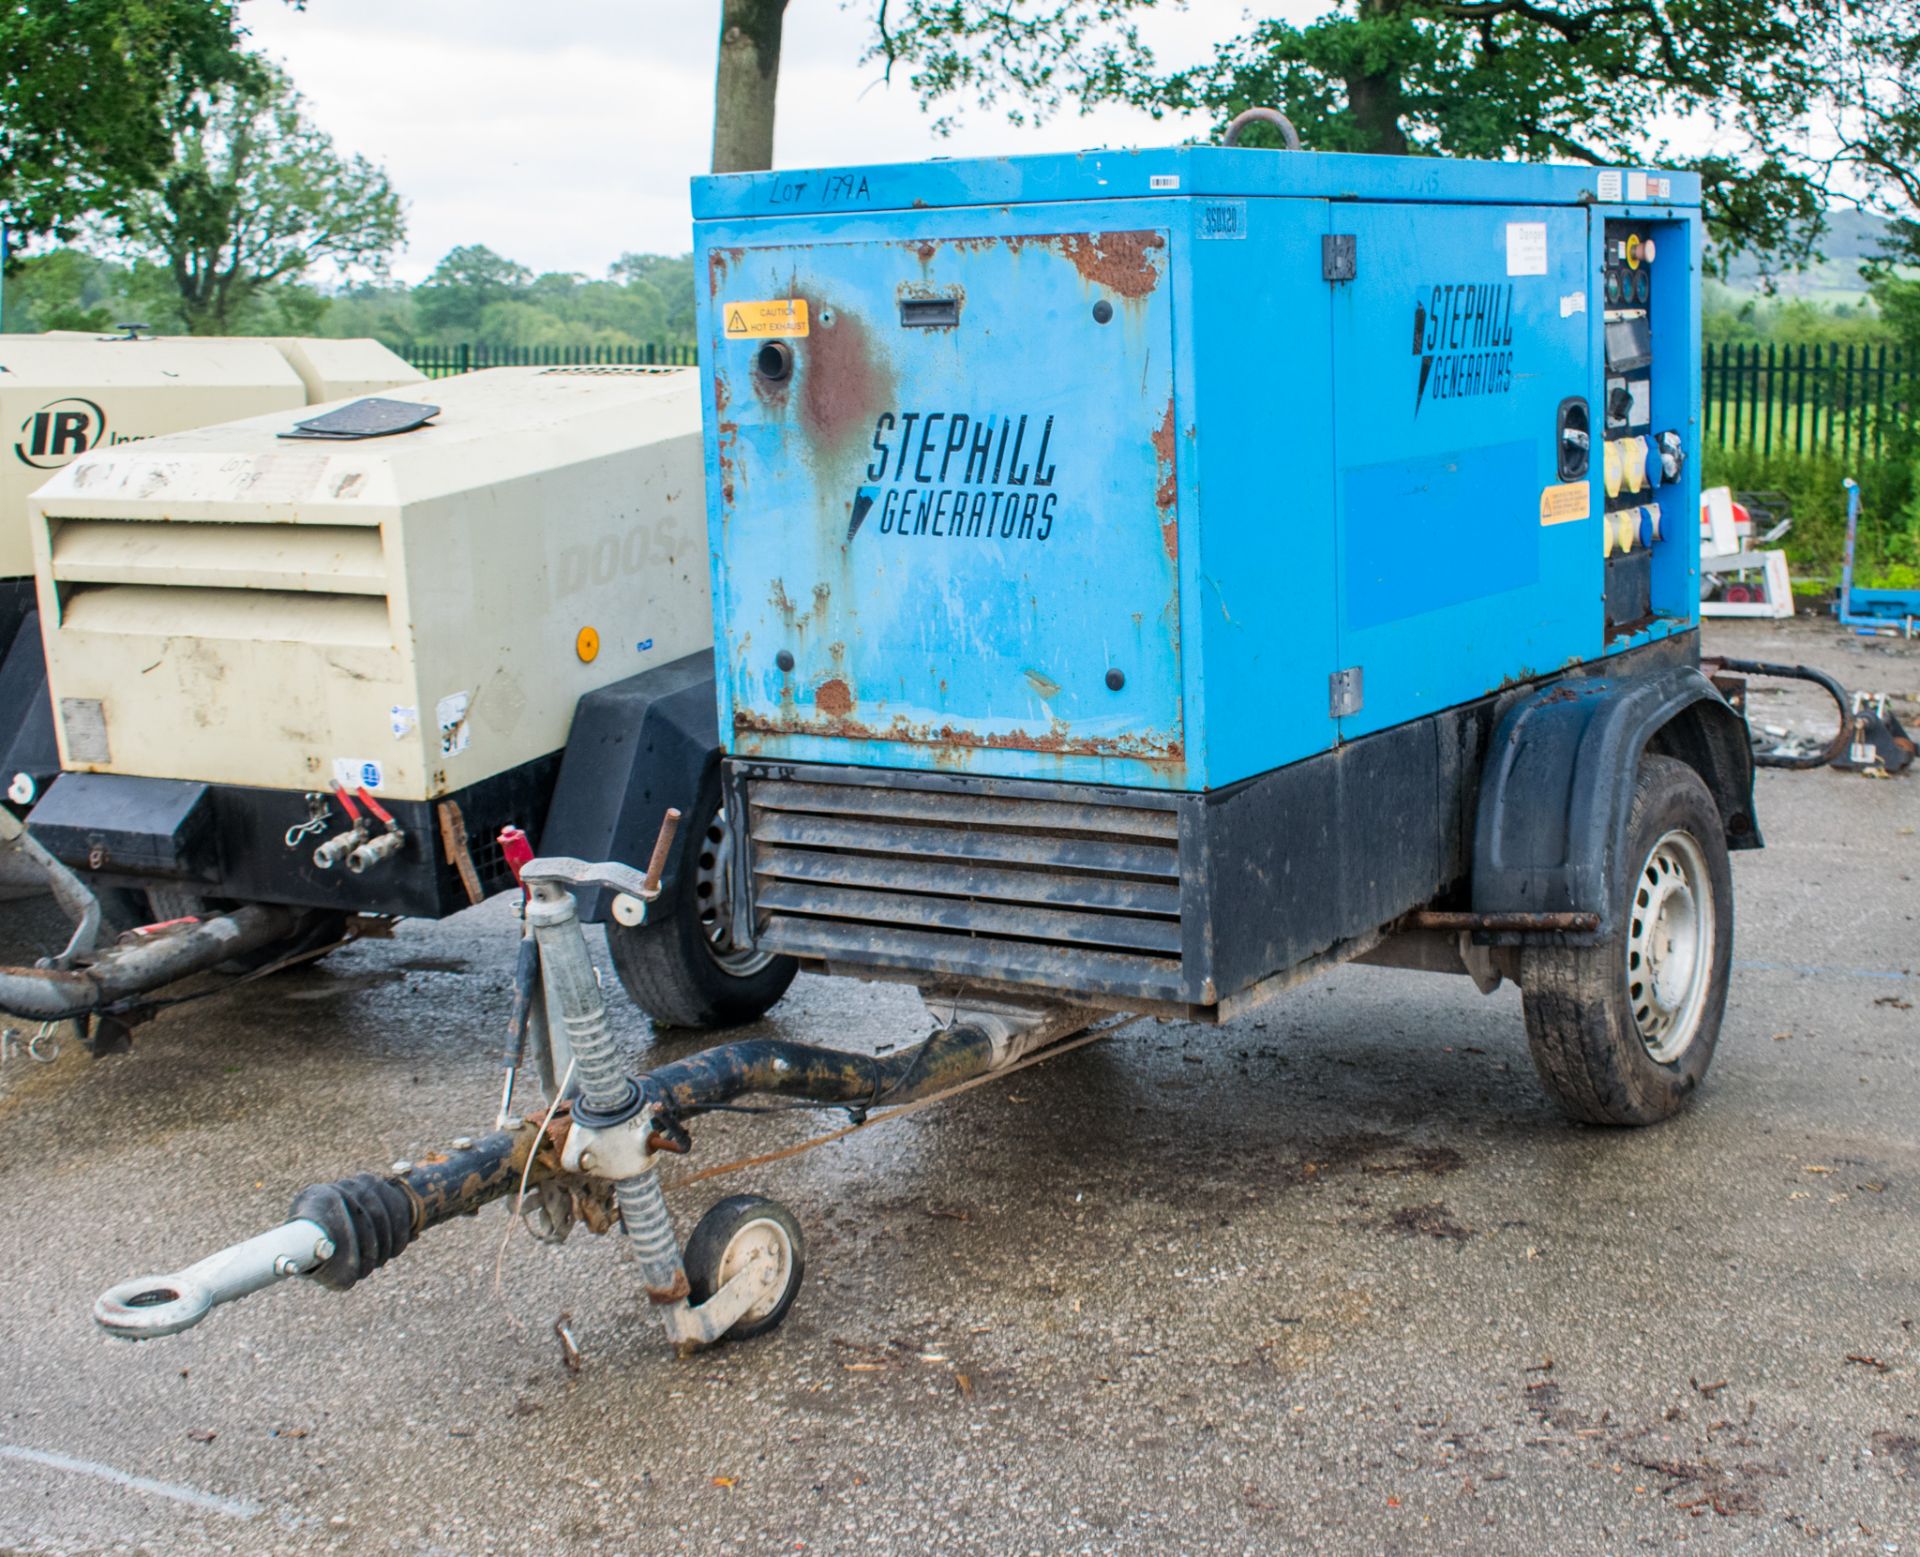 Stephill SSDX20 20 kva 110v/240v diesel driven fast tow generator S/N: 118073 Recorded Hours: